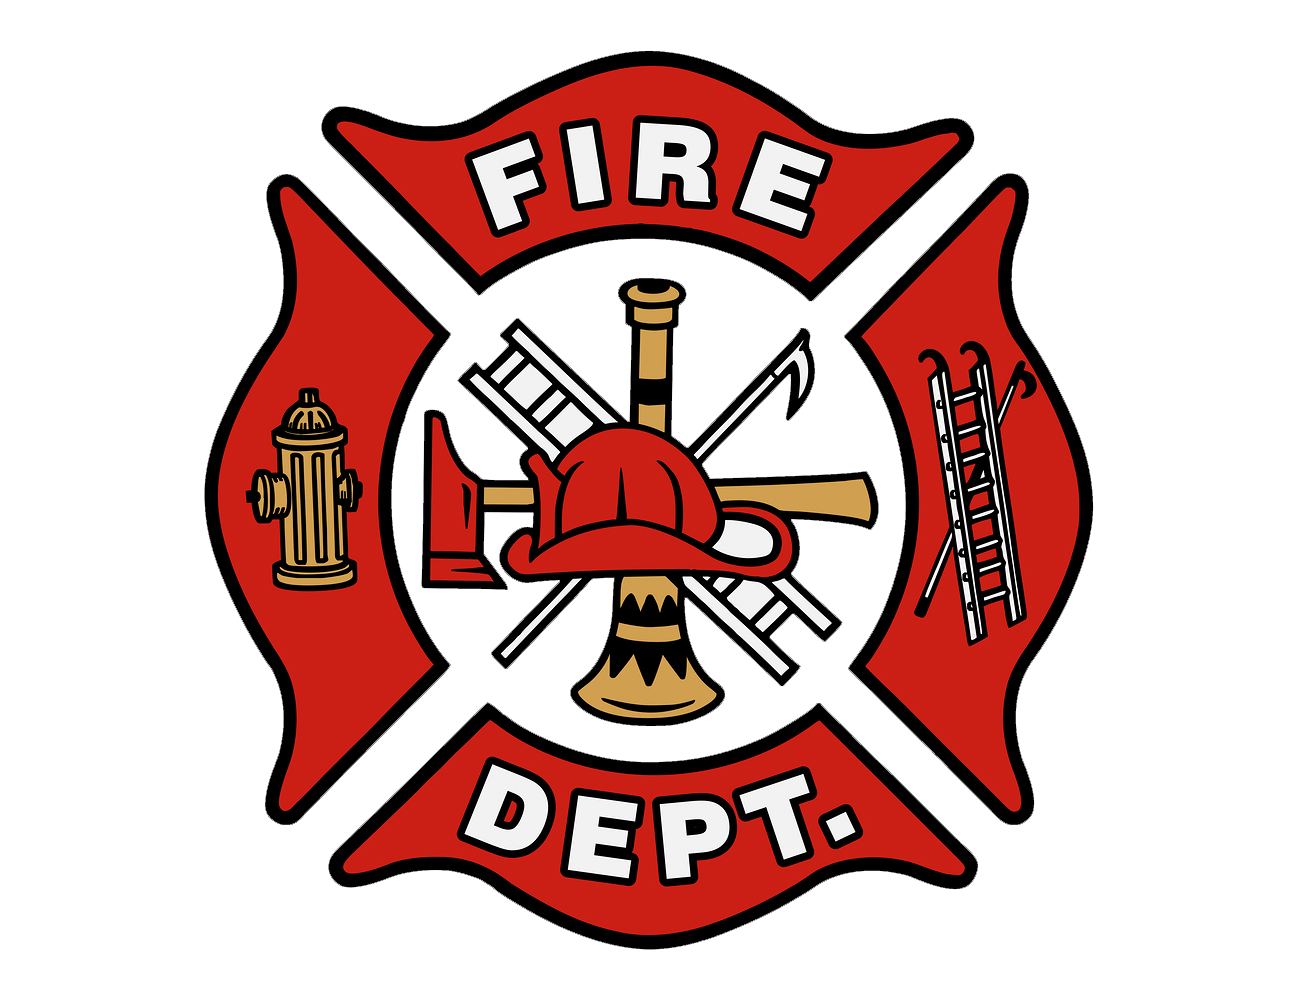 Firestation Logo - Fire Department Logo, Fire Department Symbol, Meaning, History and ...